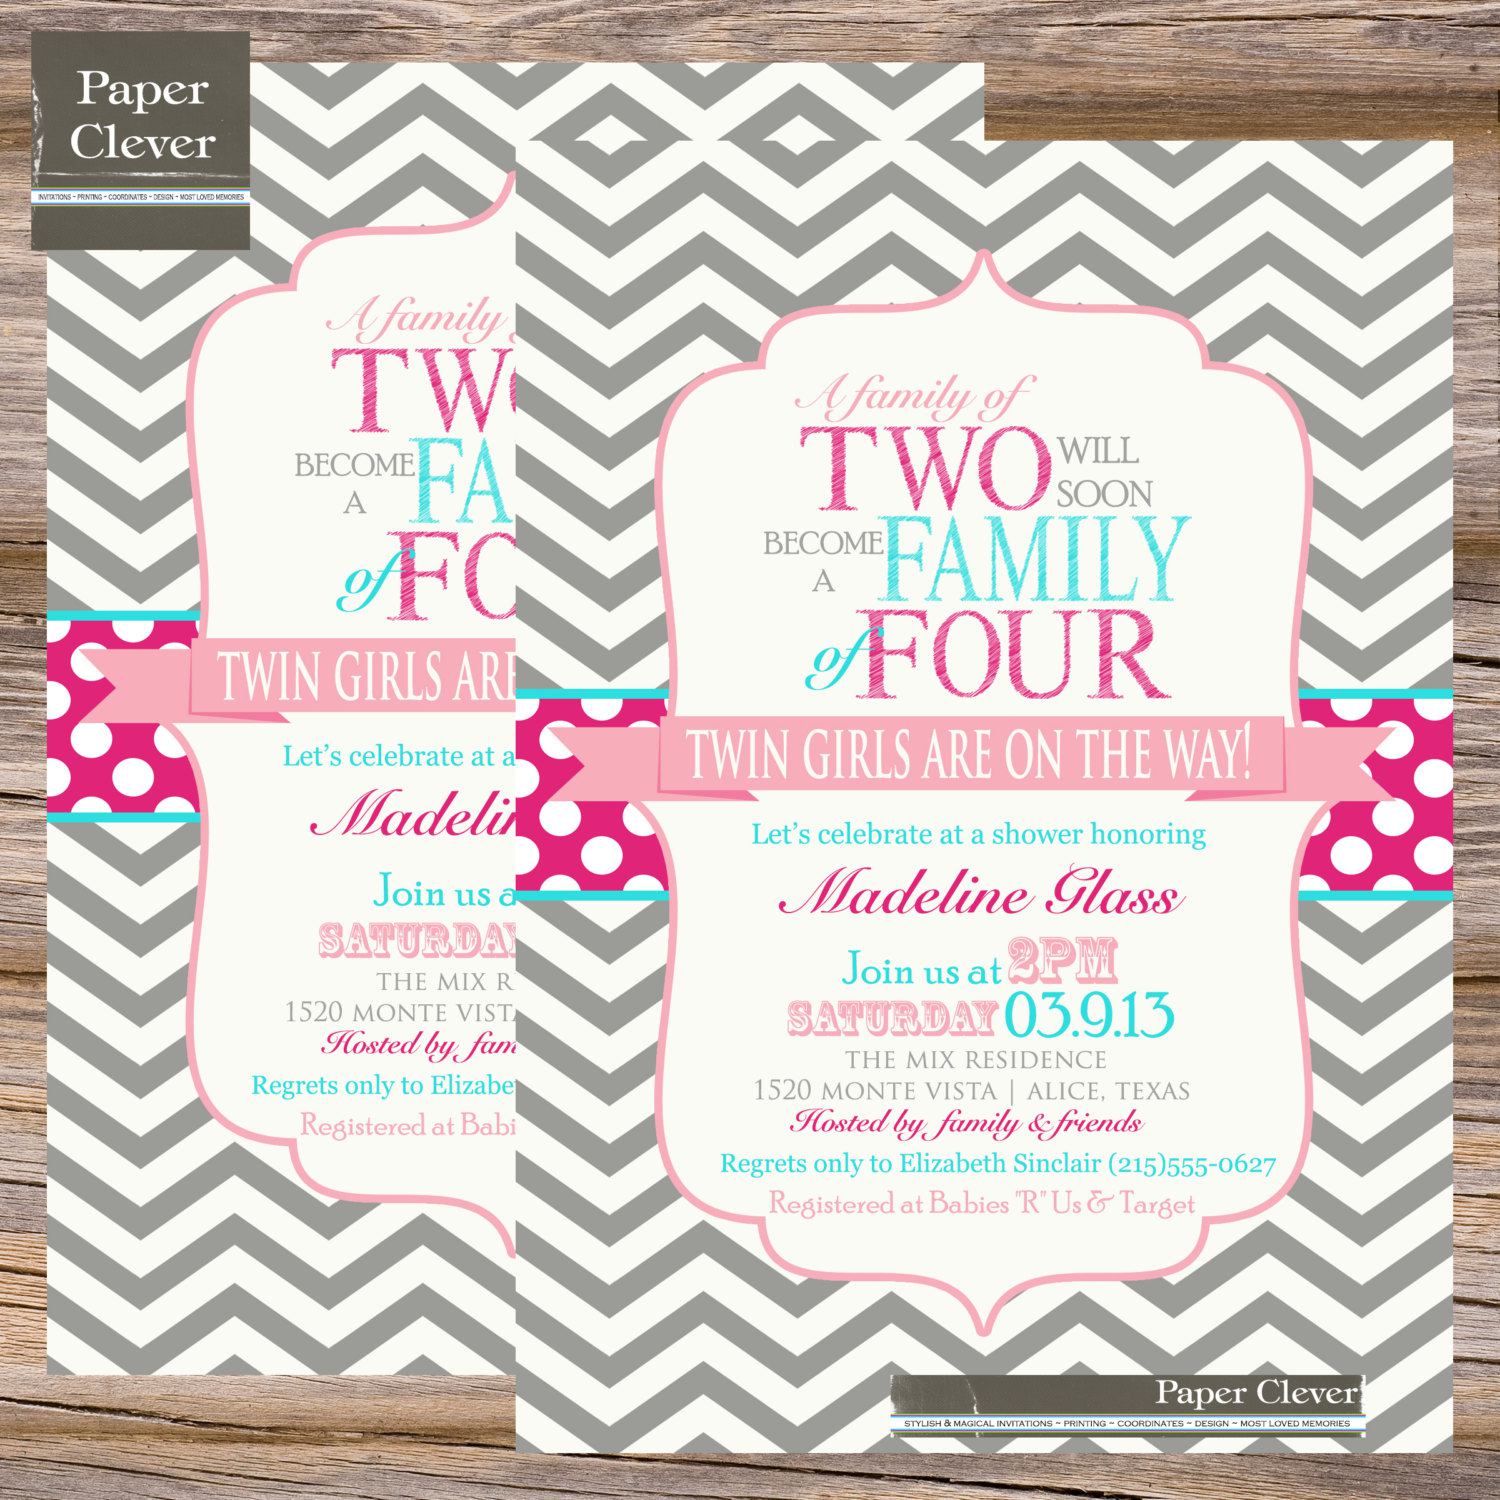 Full Size of Baby Shower:63+ Delightful Cheap Baby Shower Invitations Image Inspirations Cheap Baby Shower Invitations Twin Baby Shower Invitations